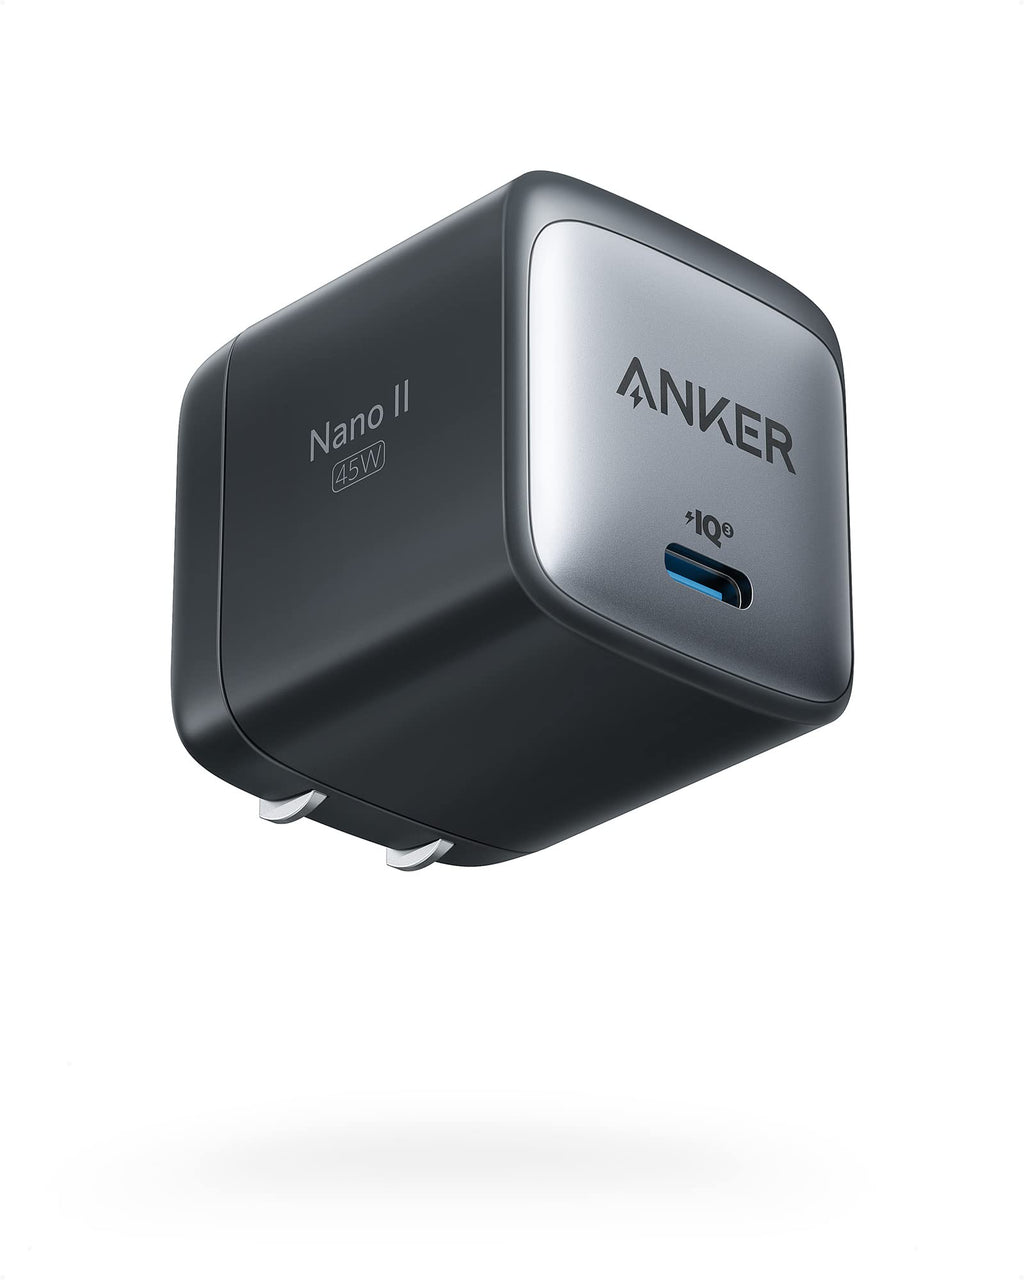 [Australia - AusPower] - Anker USB C Charger, 713 Charger (Nano II 45W), GaN II PPS Fast Compact Foldable Charger for MacBook Pro 13, Galaxy S22/S22+/S22 Ultra/S21, Note 20/10, iPhone 13/Pro/Pro Max, iPad Pro, Pixel, and More 